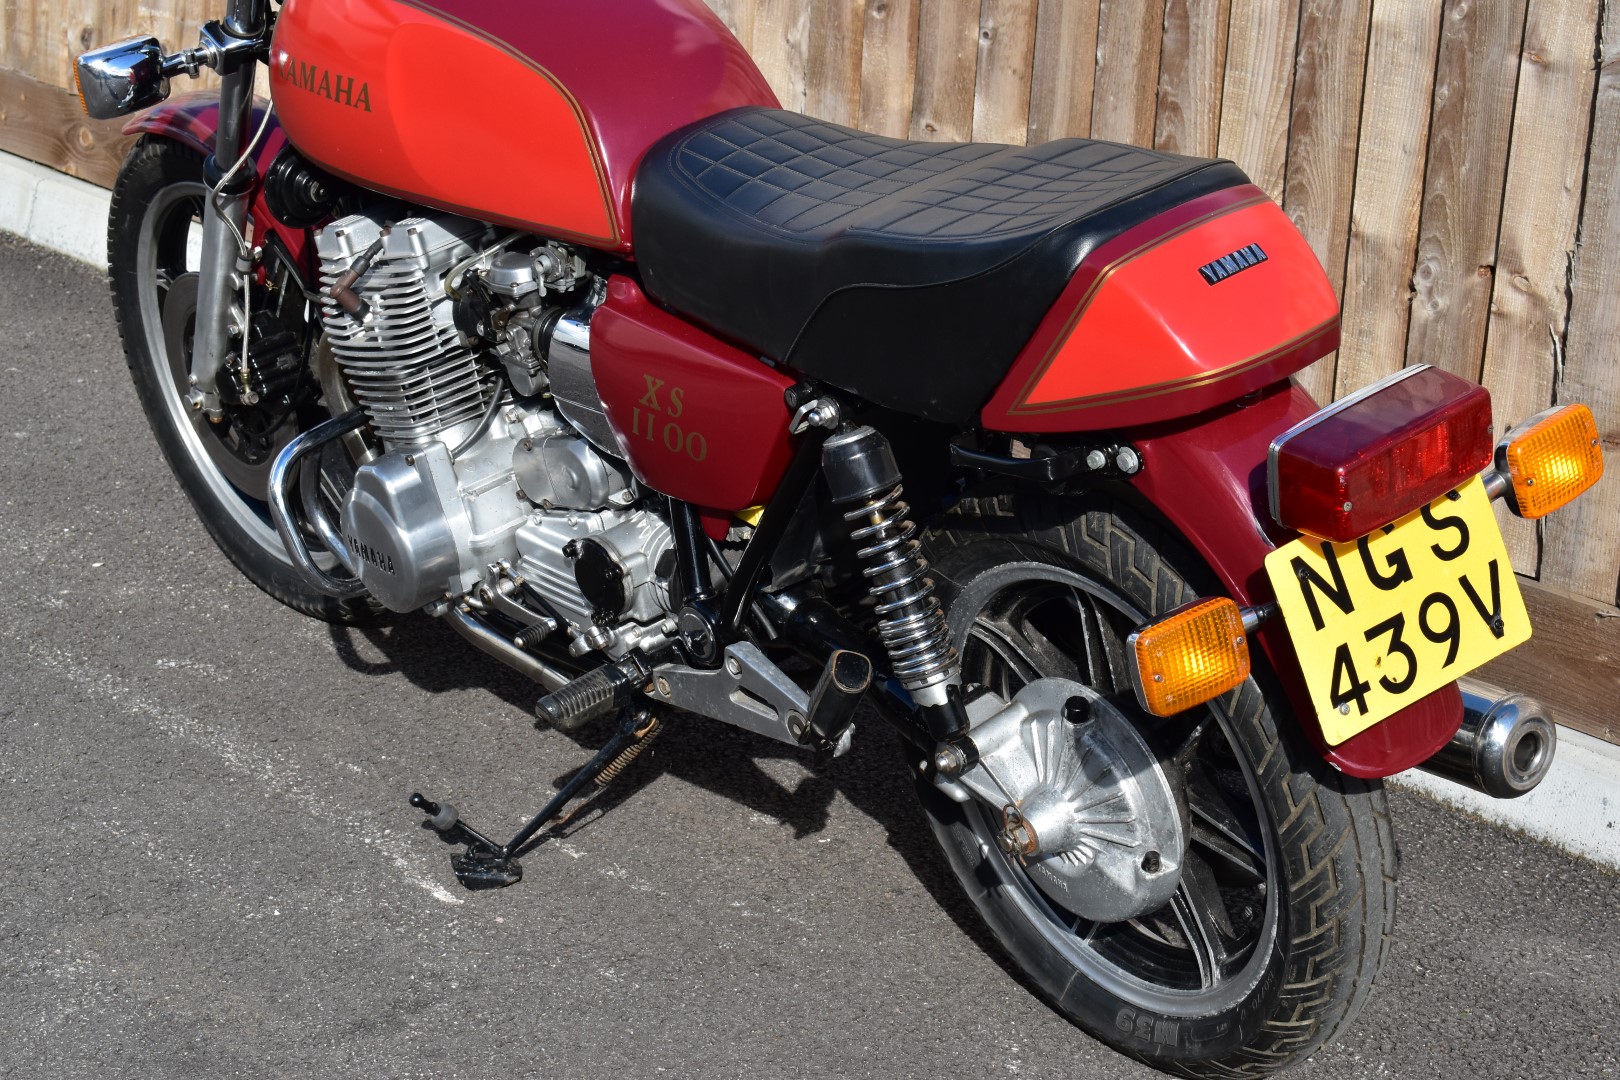 1980 Yamaha XS1100 motorbike registration NGS 439V, with V5c, used by the vendor for continental - Image 4 of 17